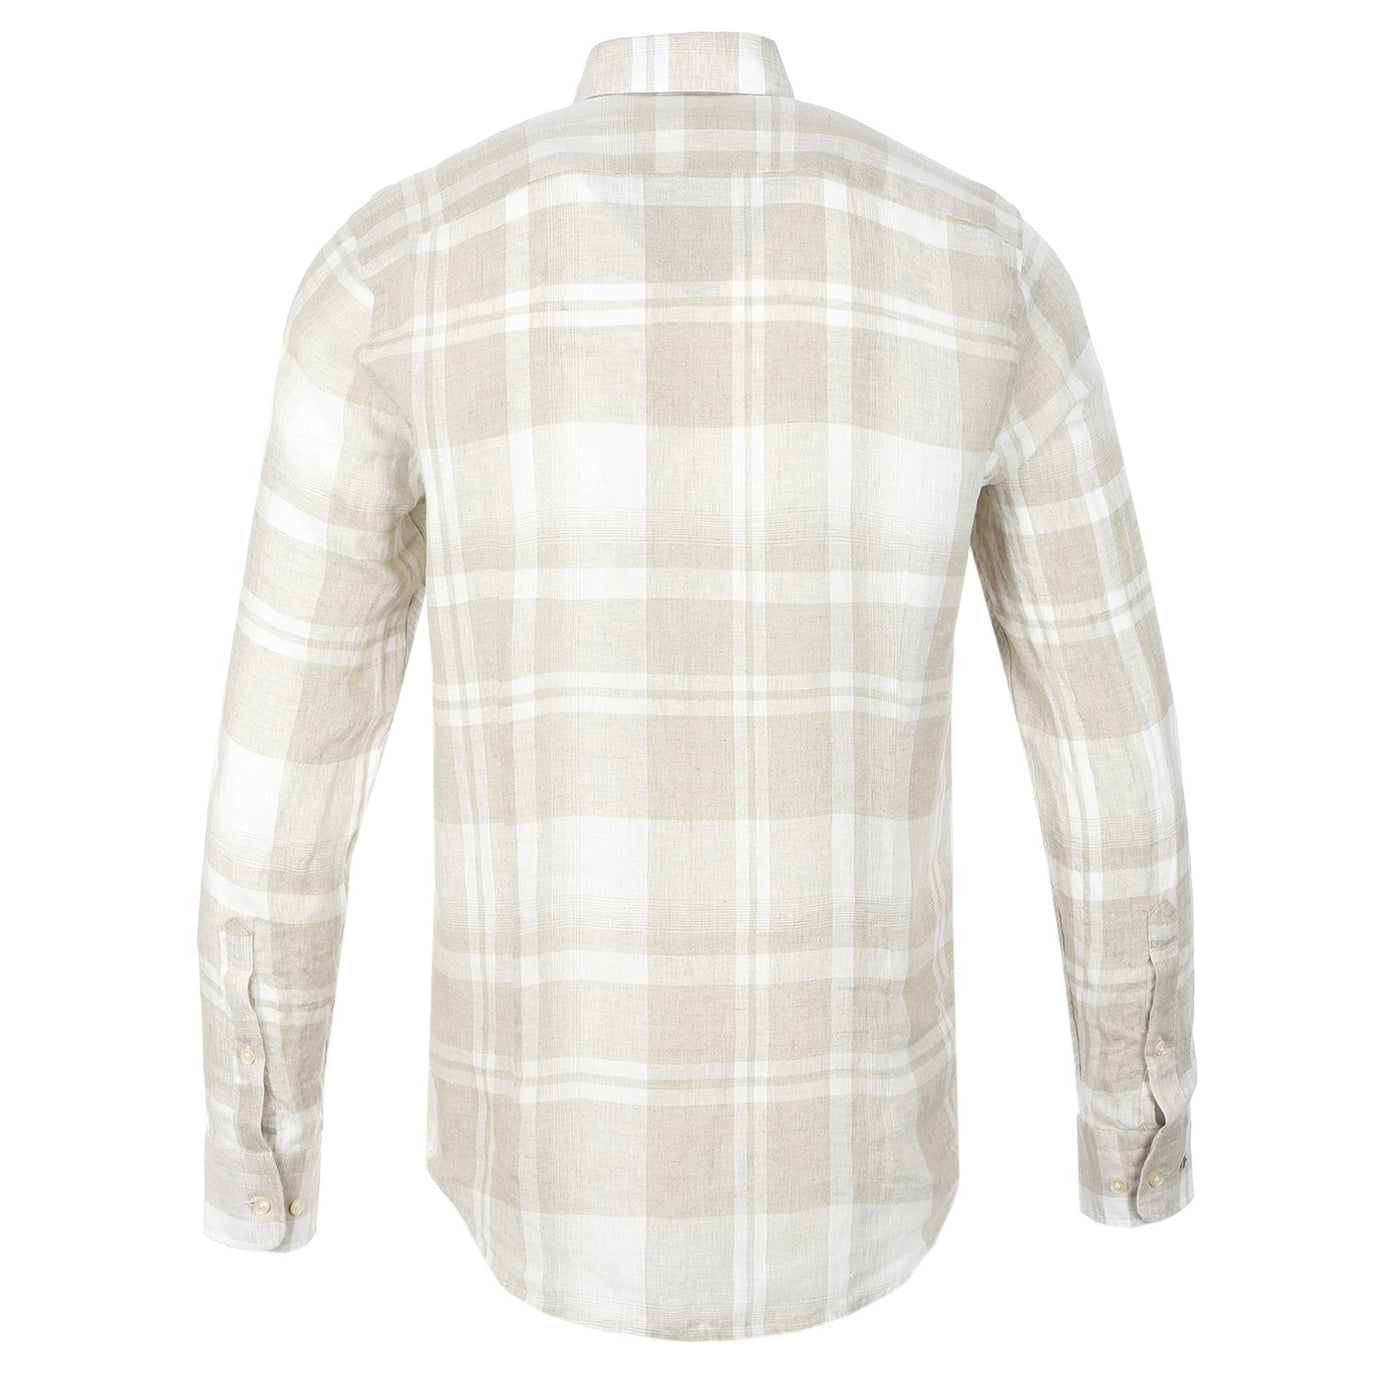 Thomas Maine Linen Check Shirt in Beige Back